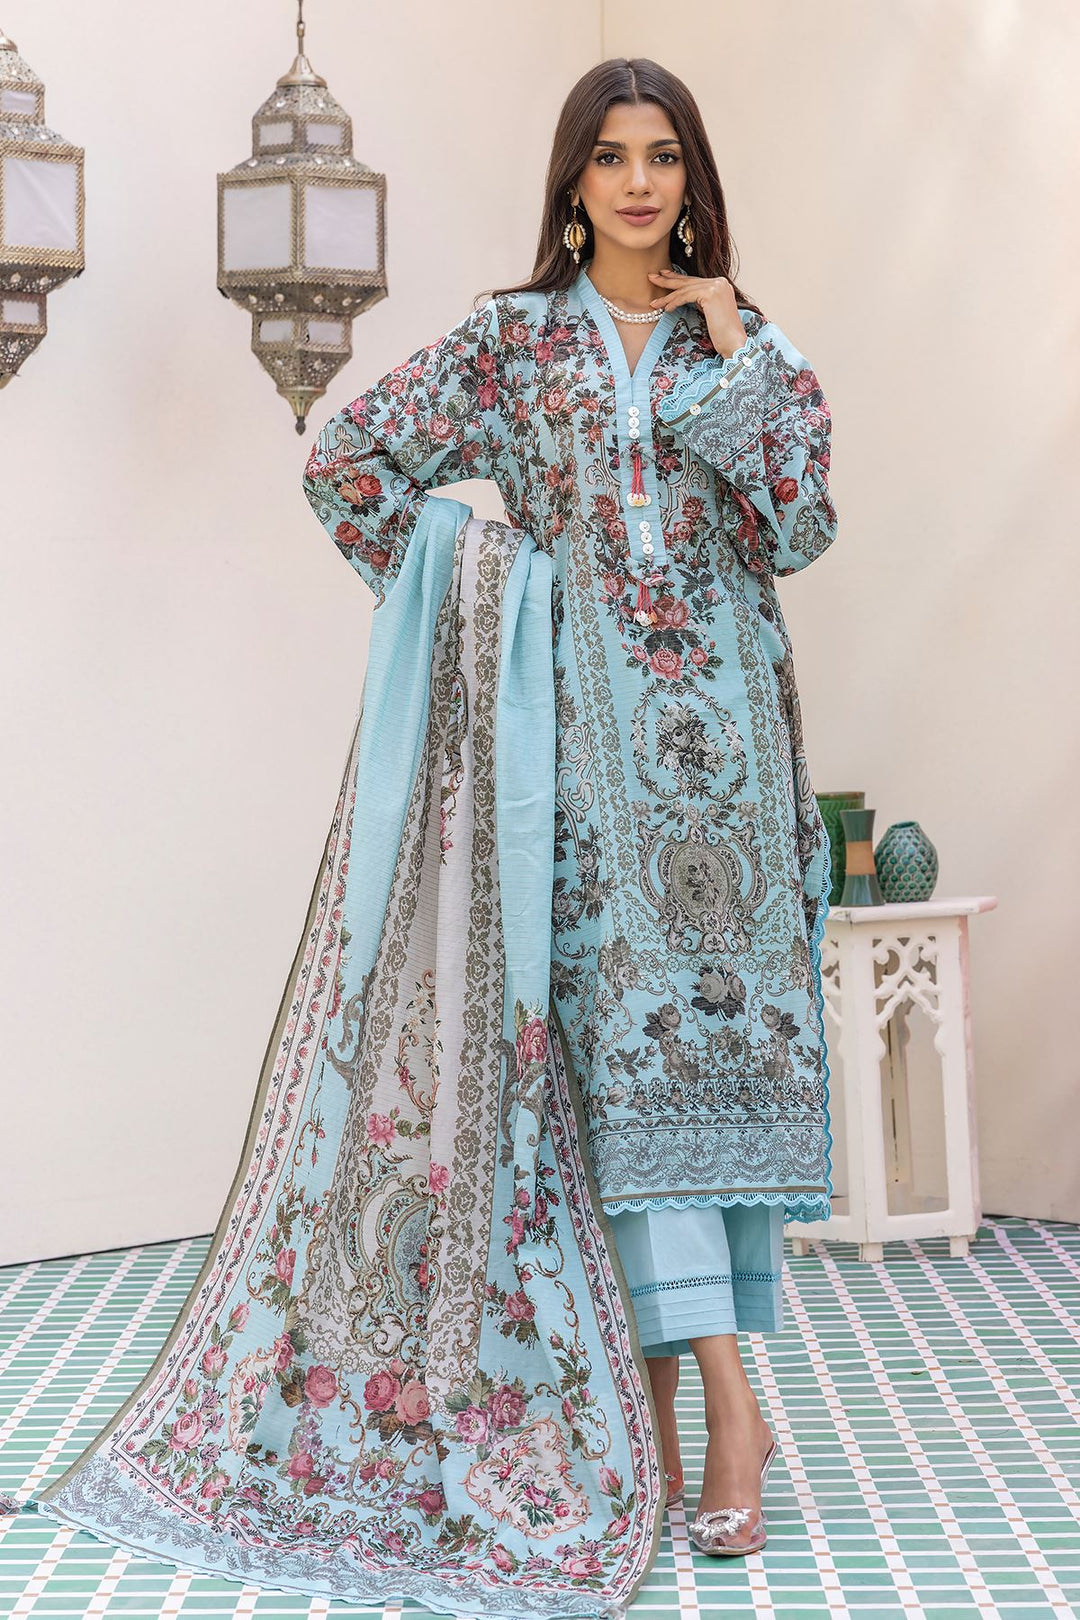 pakistani dresses online usa a woman in a blue dress and shawl